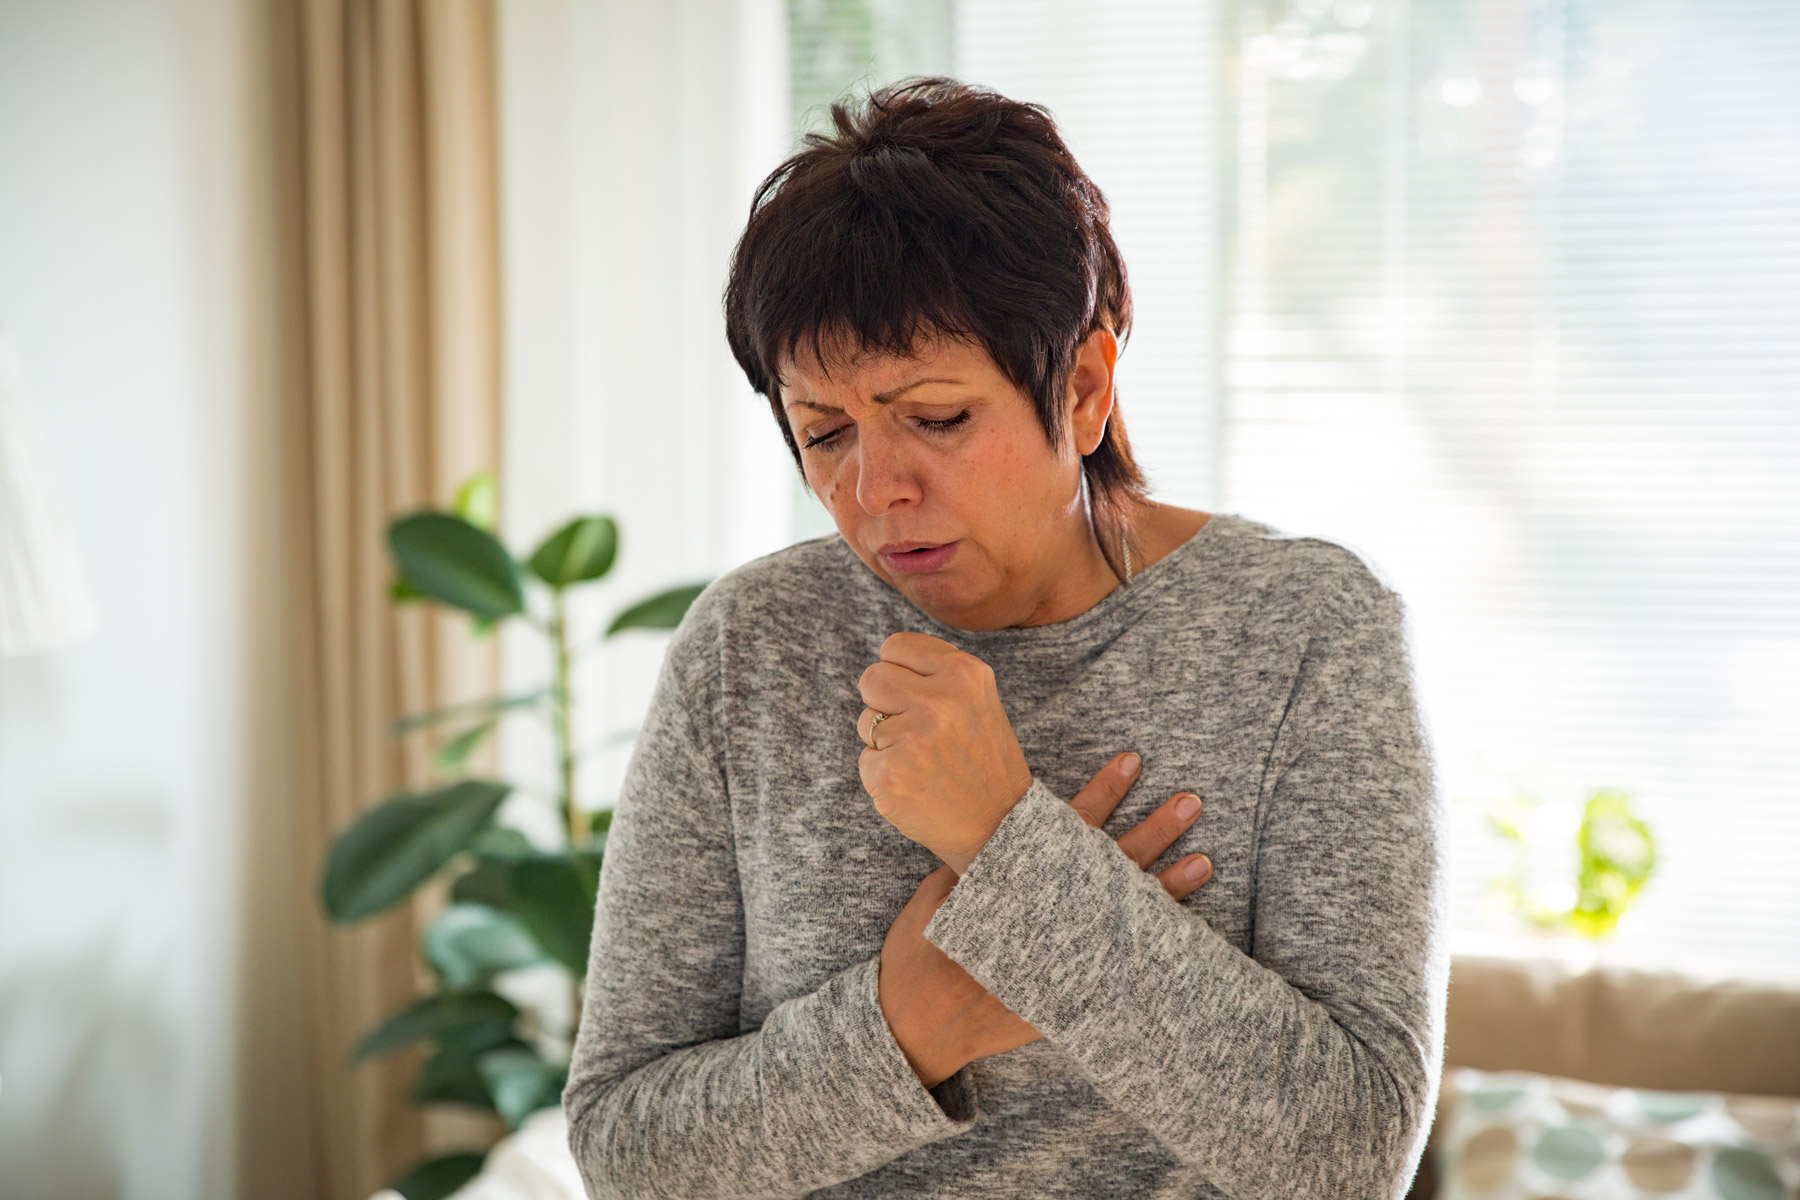 Middle-aged woman coughing in front of picture window and plant 